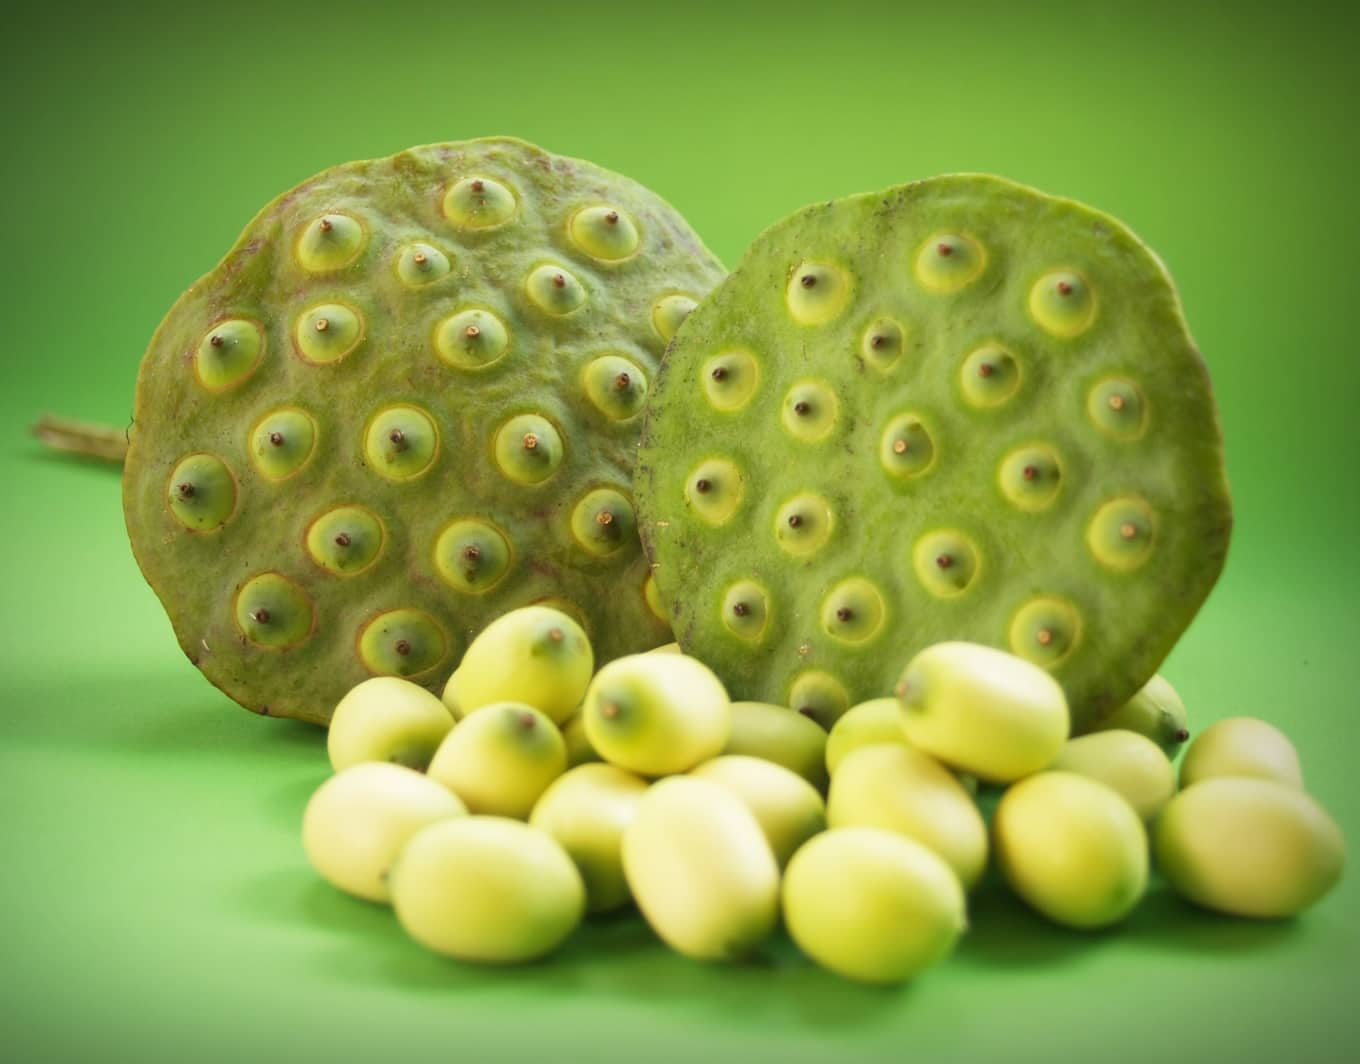 Water Lily Fruit Benefits: Are Water Lily Seeds Good For You?